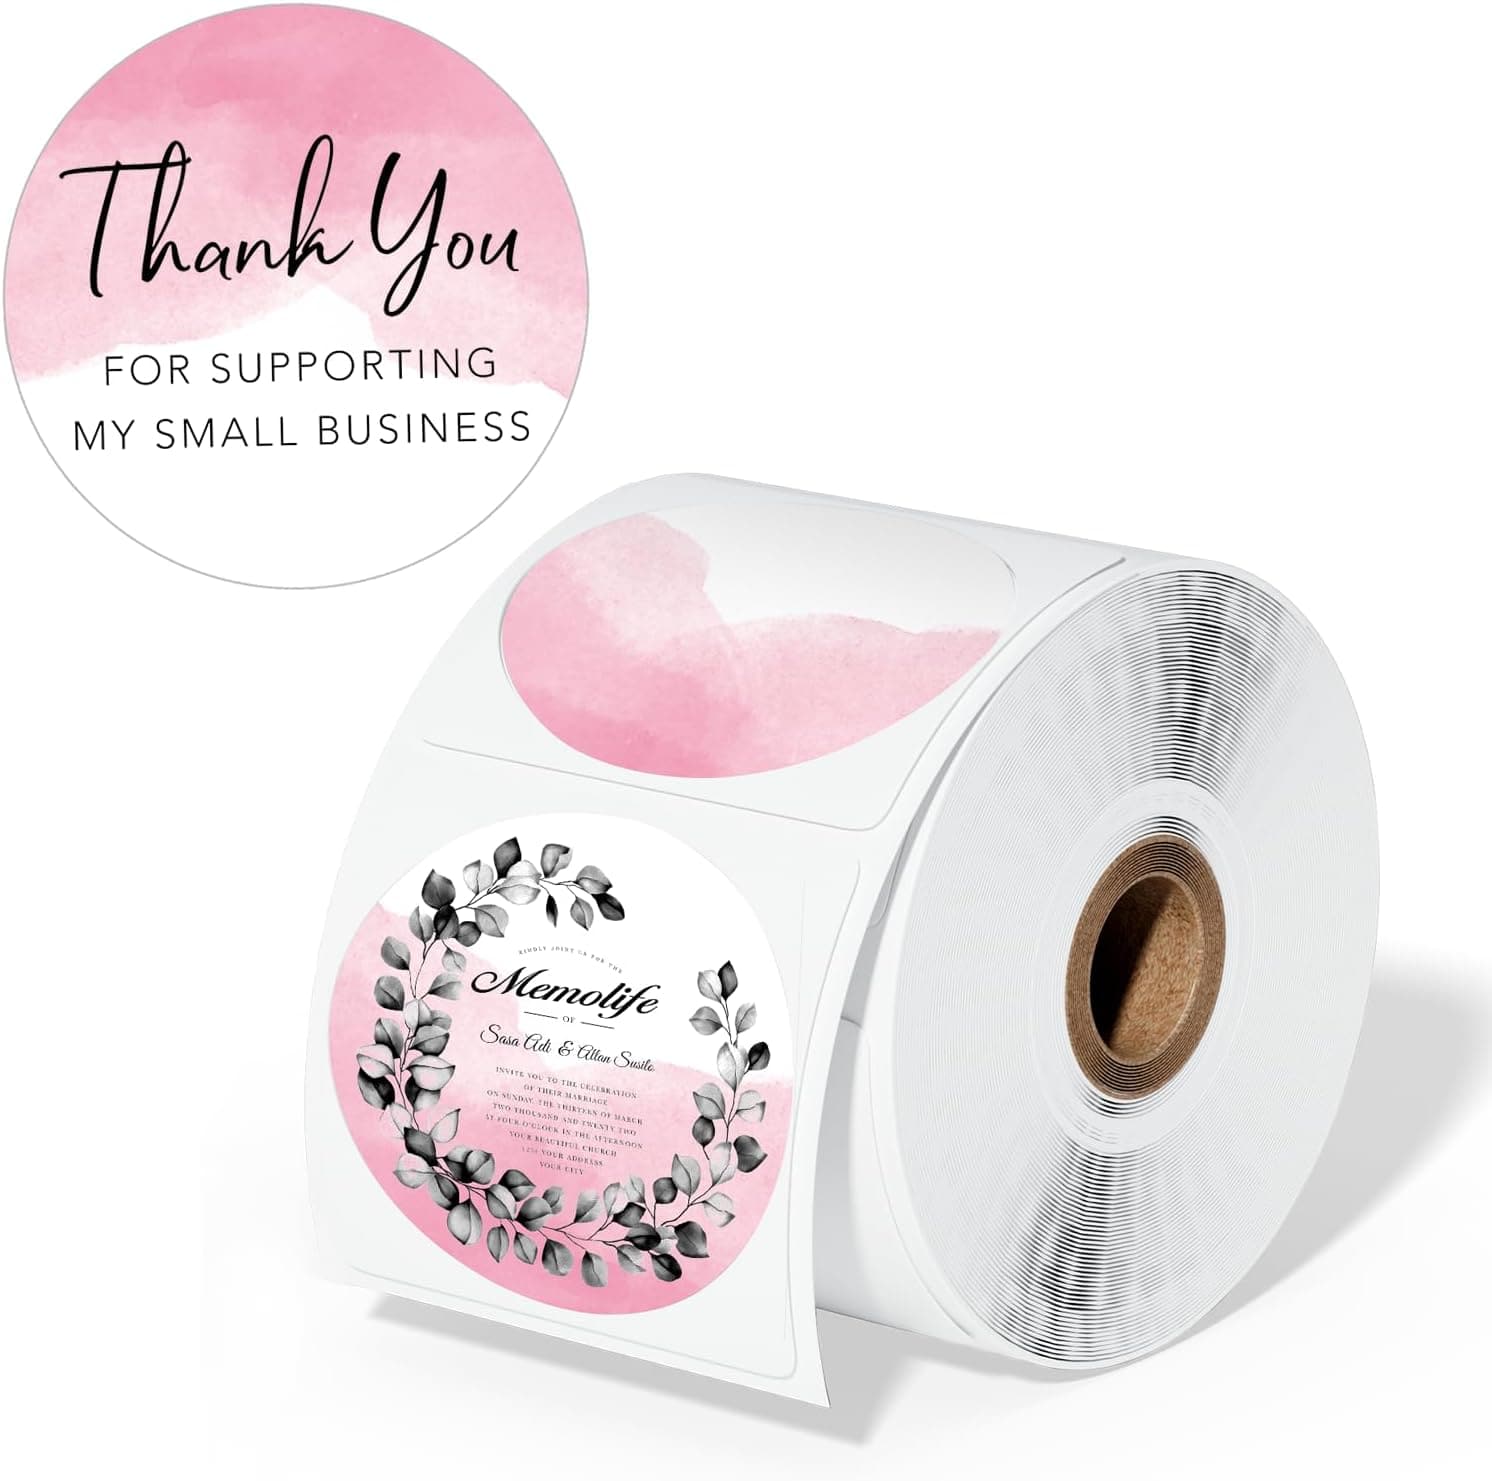 2" Pink Round Thermal Label Sticker for Shipping Label Printer